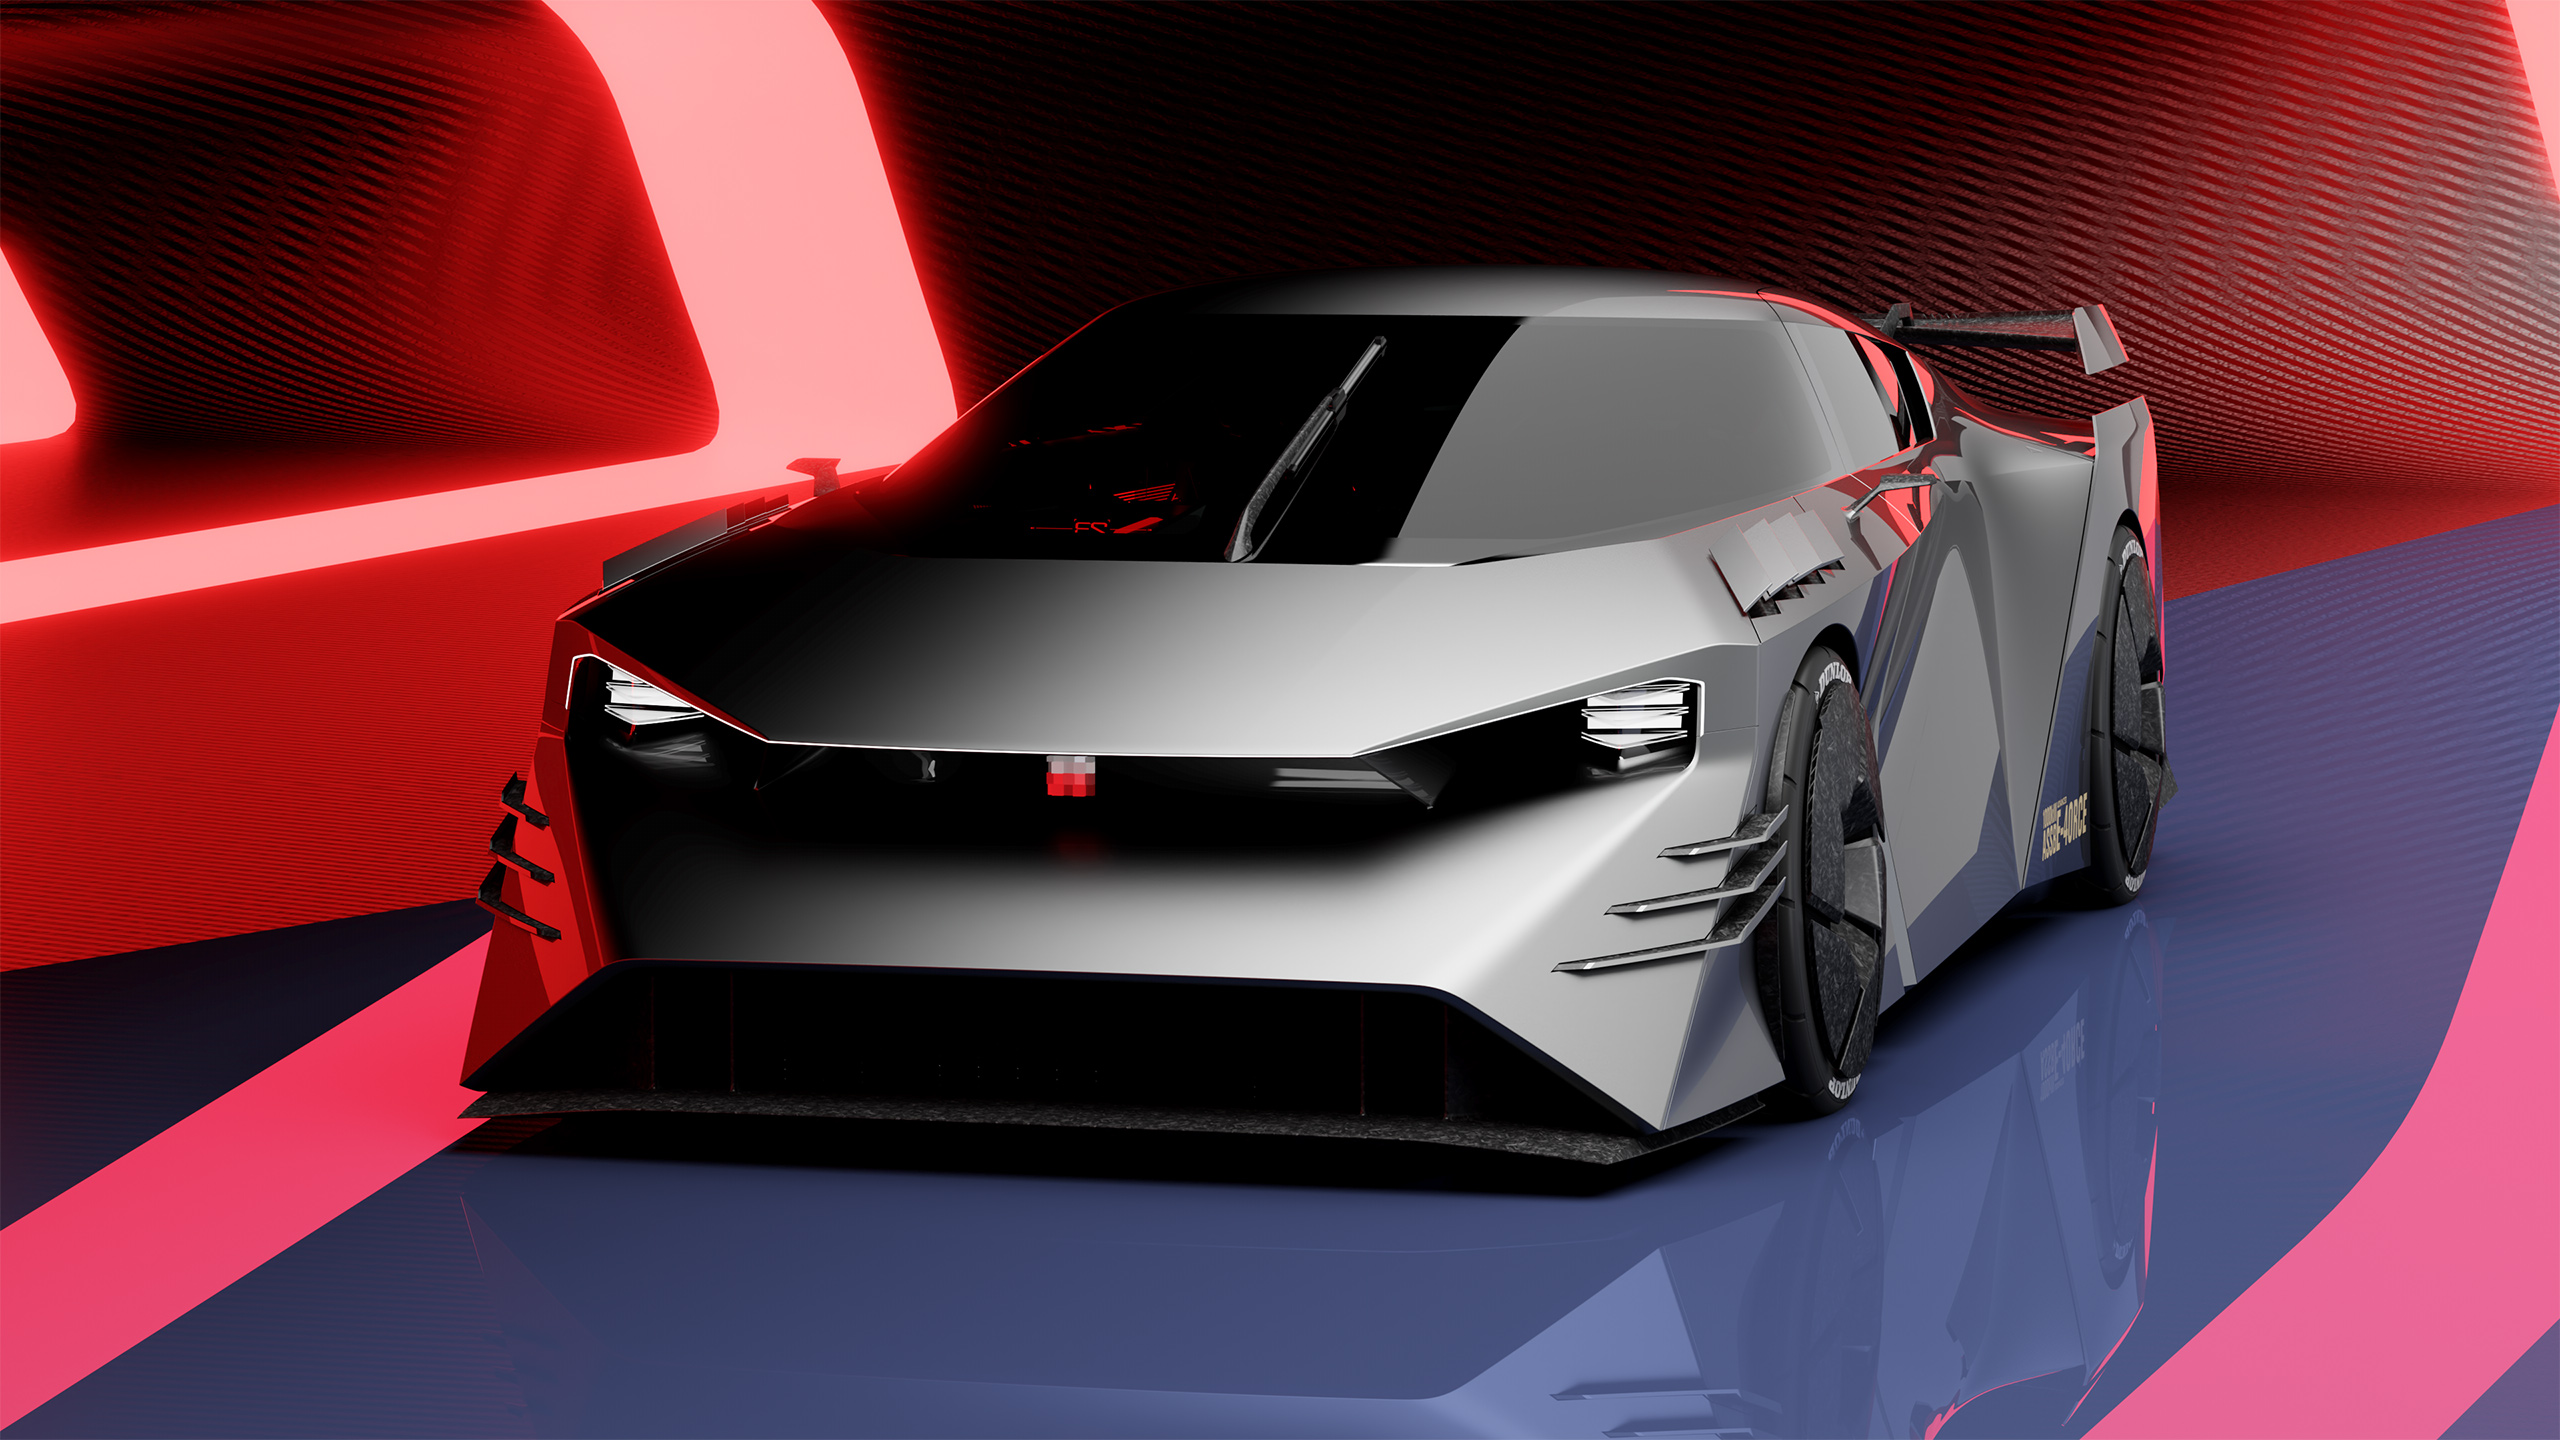 Nissan Hyper Force Concept Is a Future GT-R Shaped by Gran Turismo